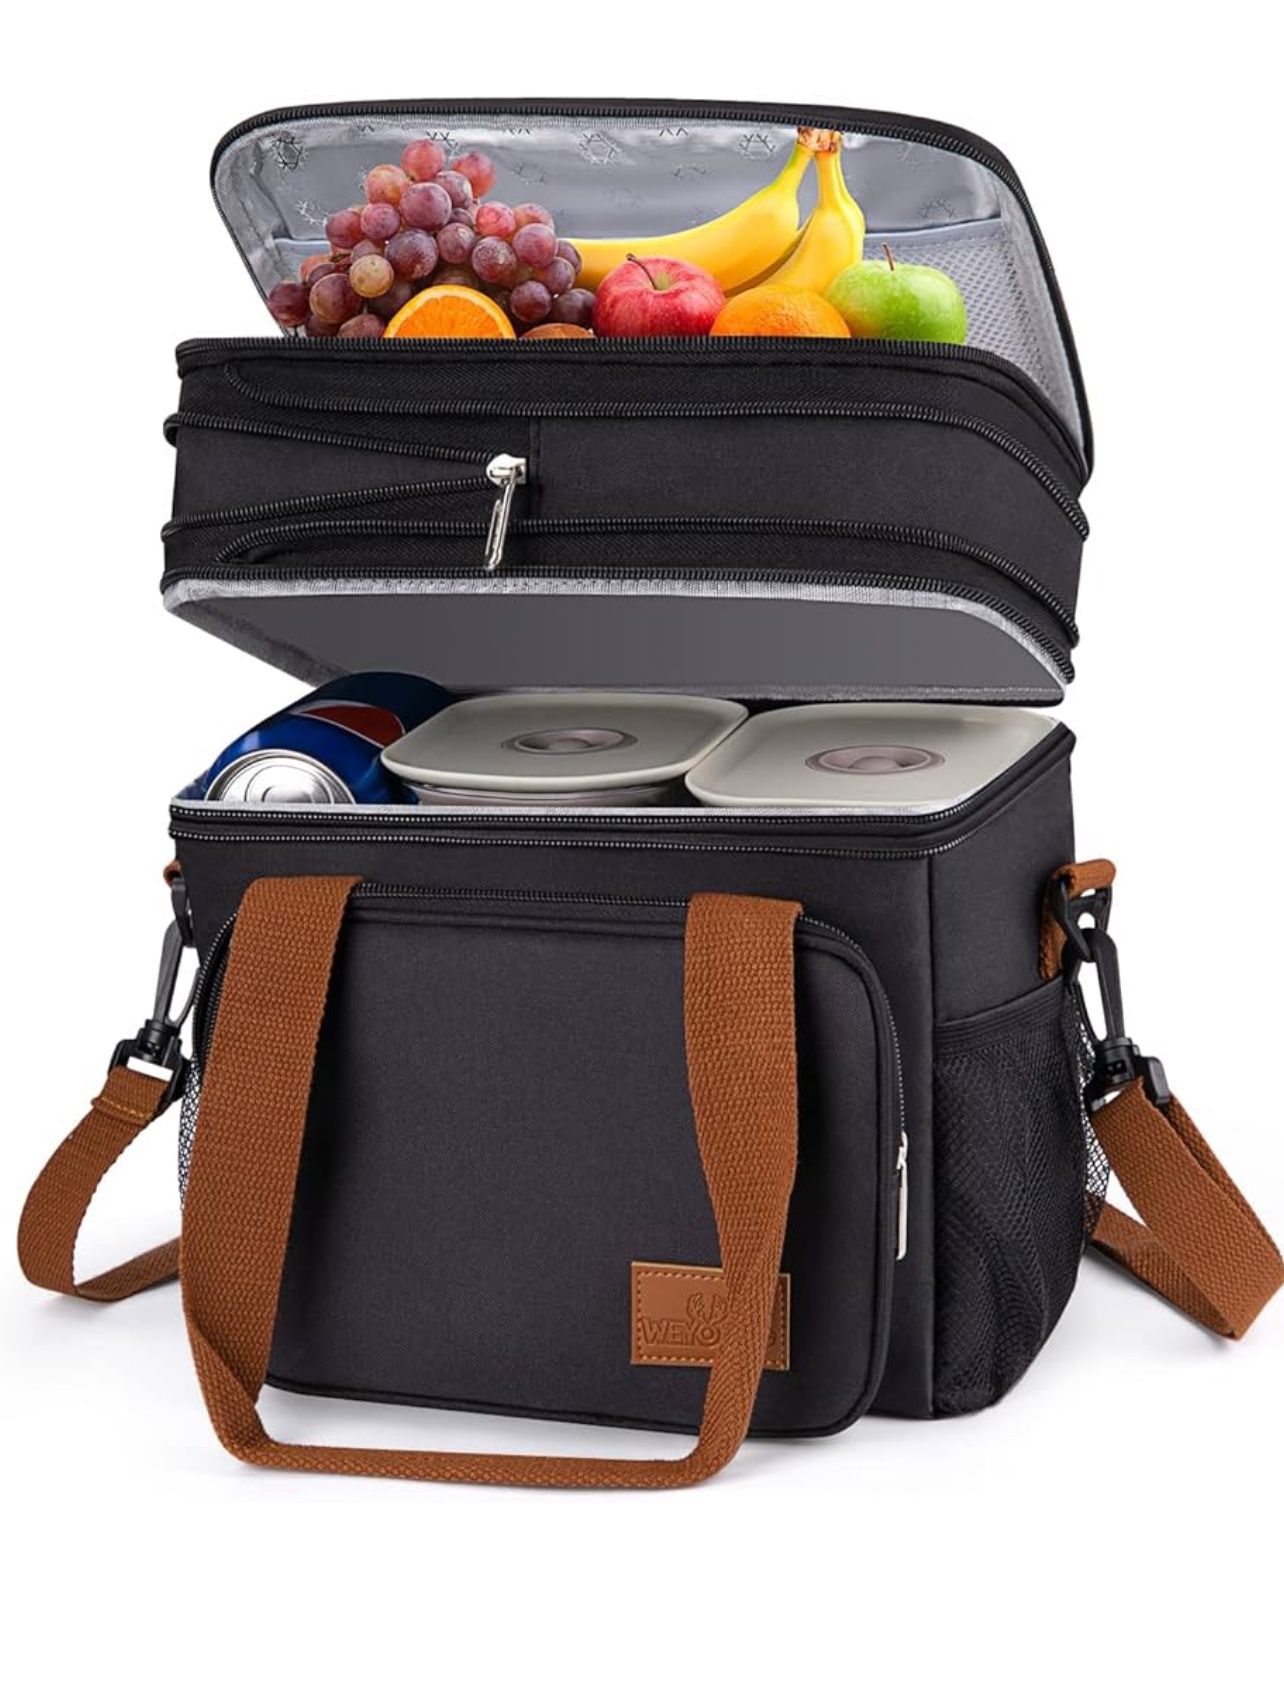 Brandnew Lunch Box for Men, 17L Insulated Cooler Lunch Bag Women Expandable Double Deck Lunch Cooler Bag,Lightweight Leakproof Lunch Tote Bag, Suit Fo